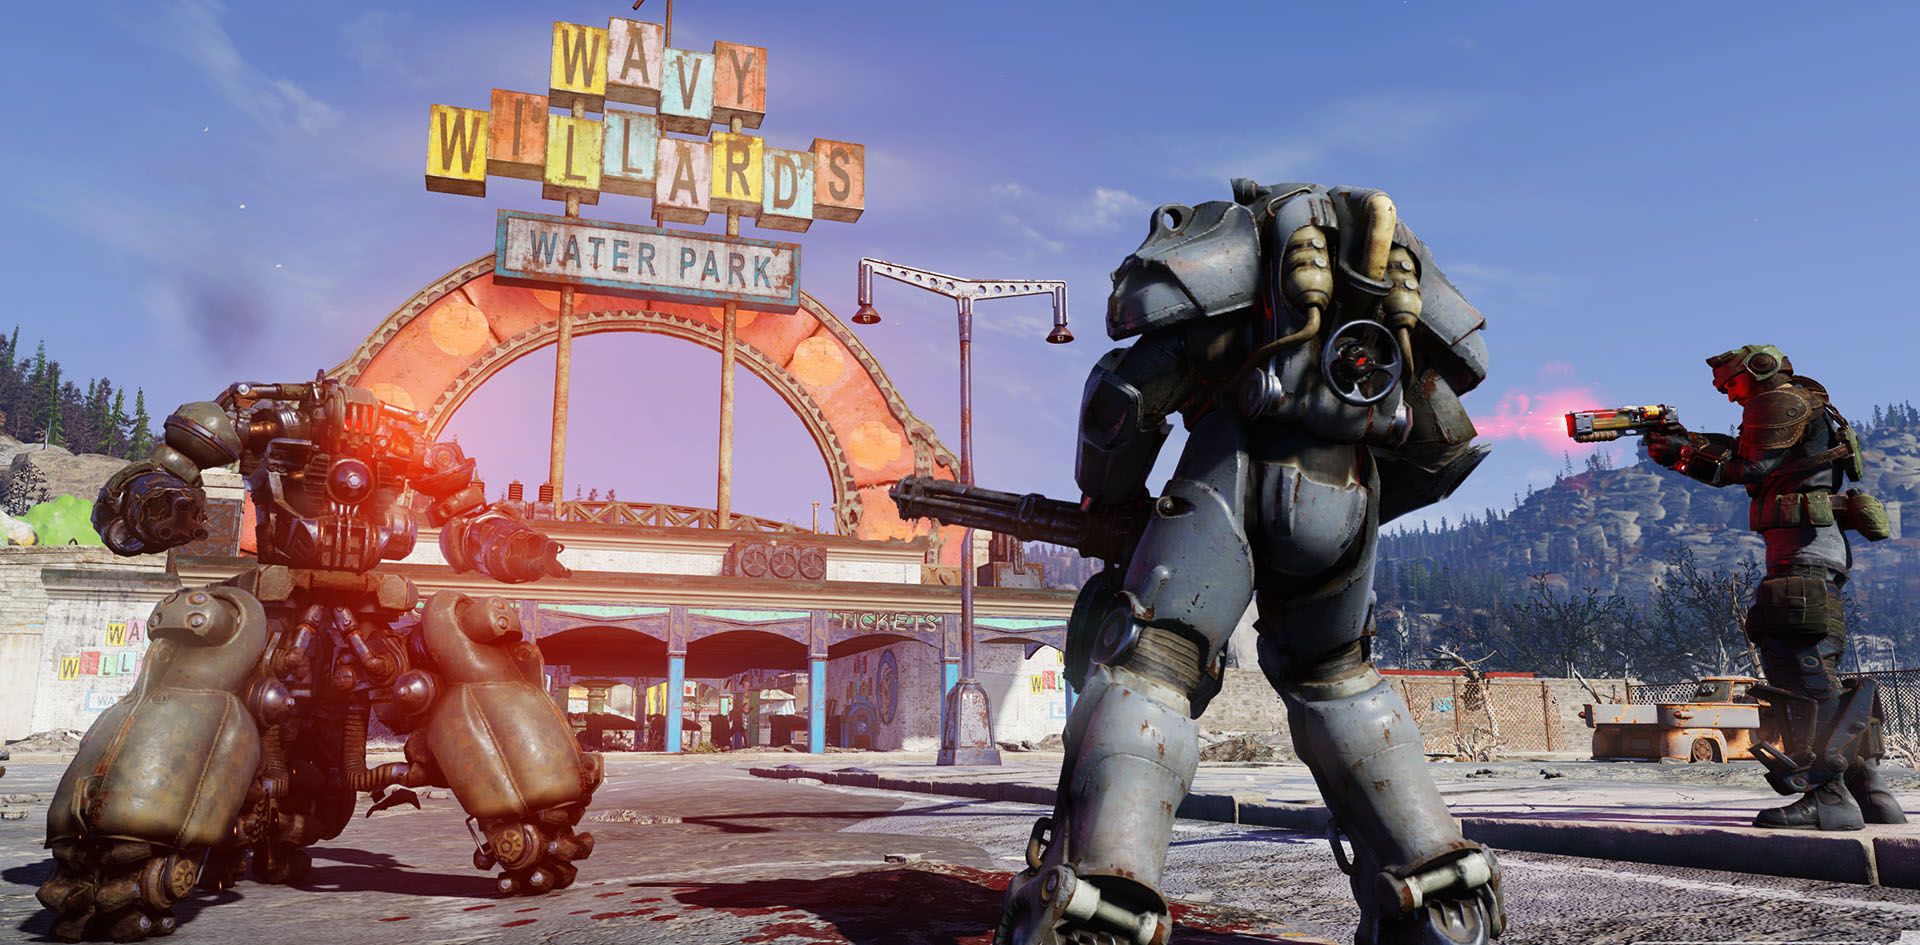 Fallout 76 combat guide stealth wavy willard's water park